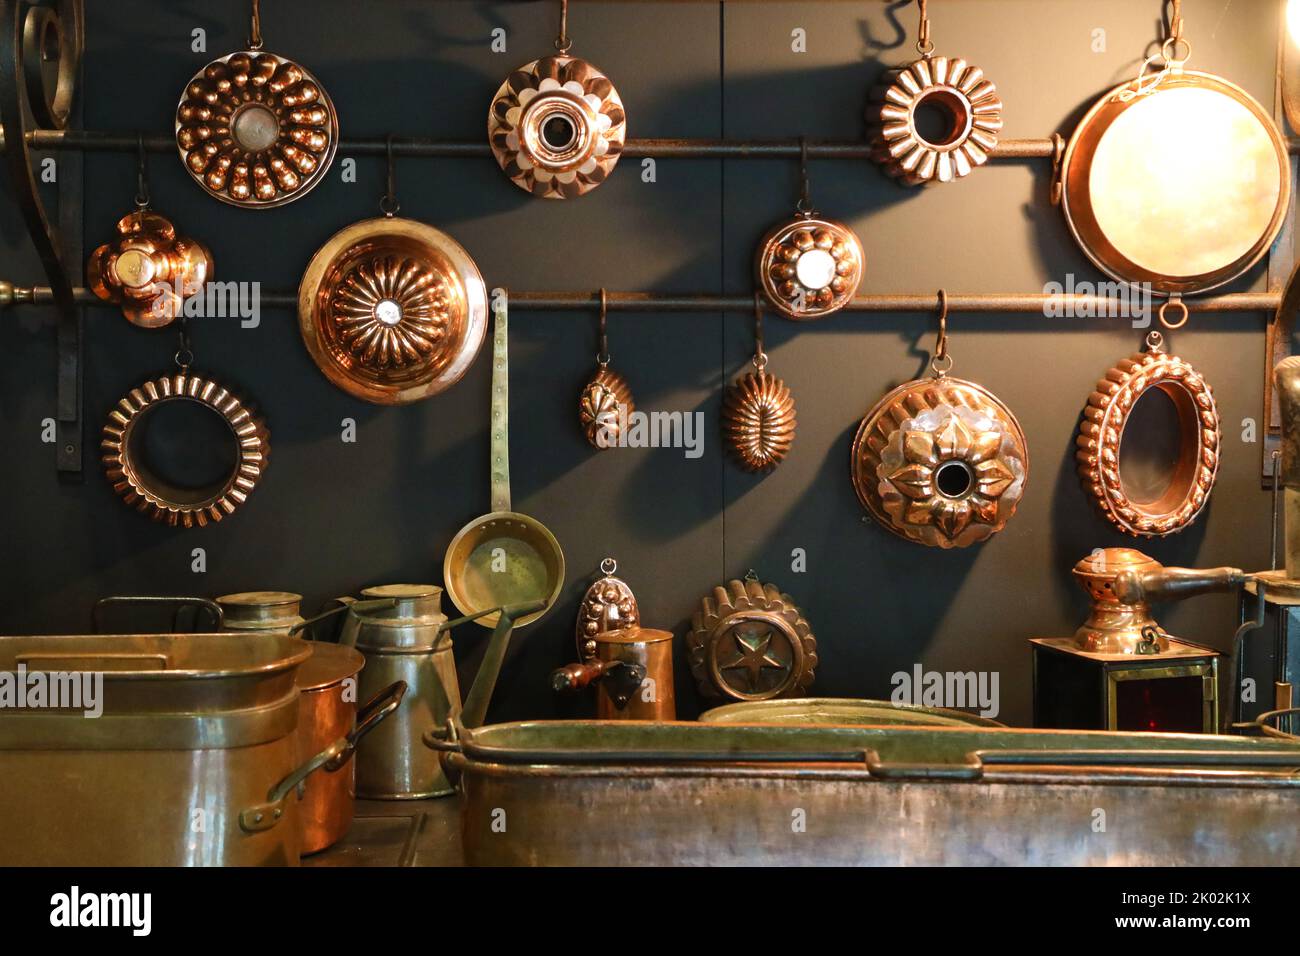 Exposition of vintage copper molds Stock Photo